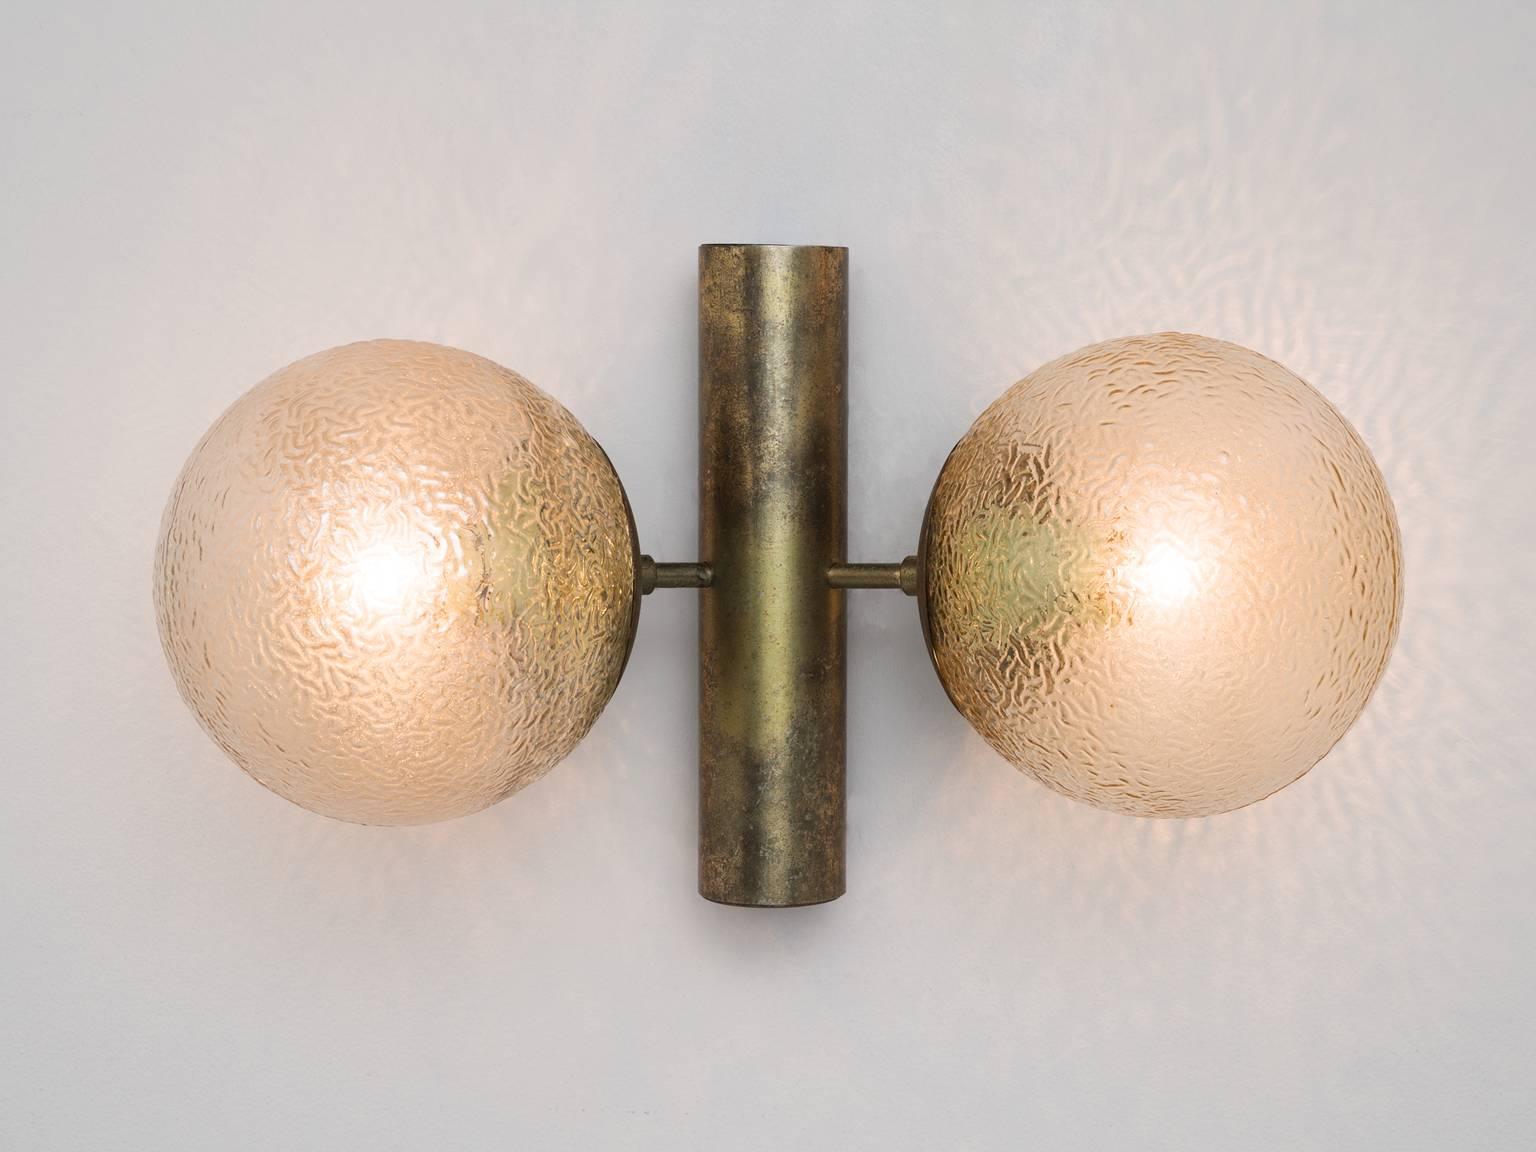 European Set of 4 Brass Colored Wall Lights with Structured Glass